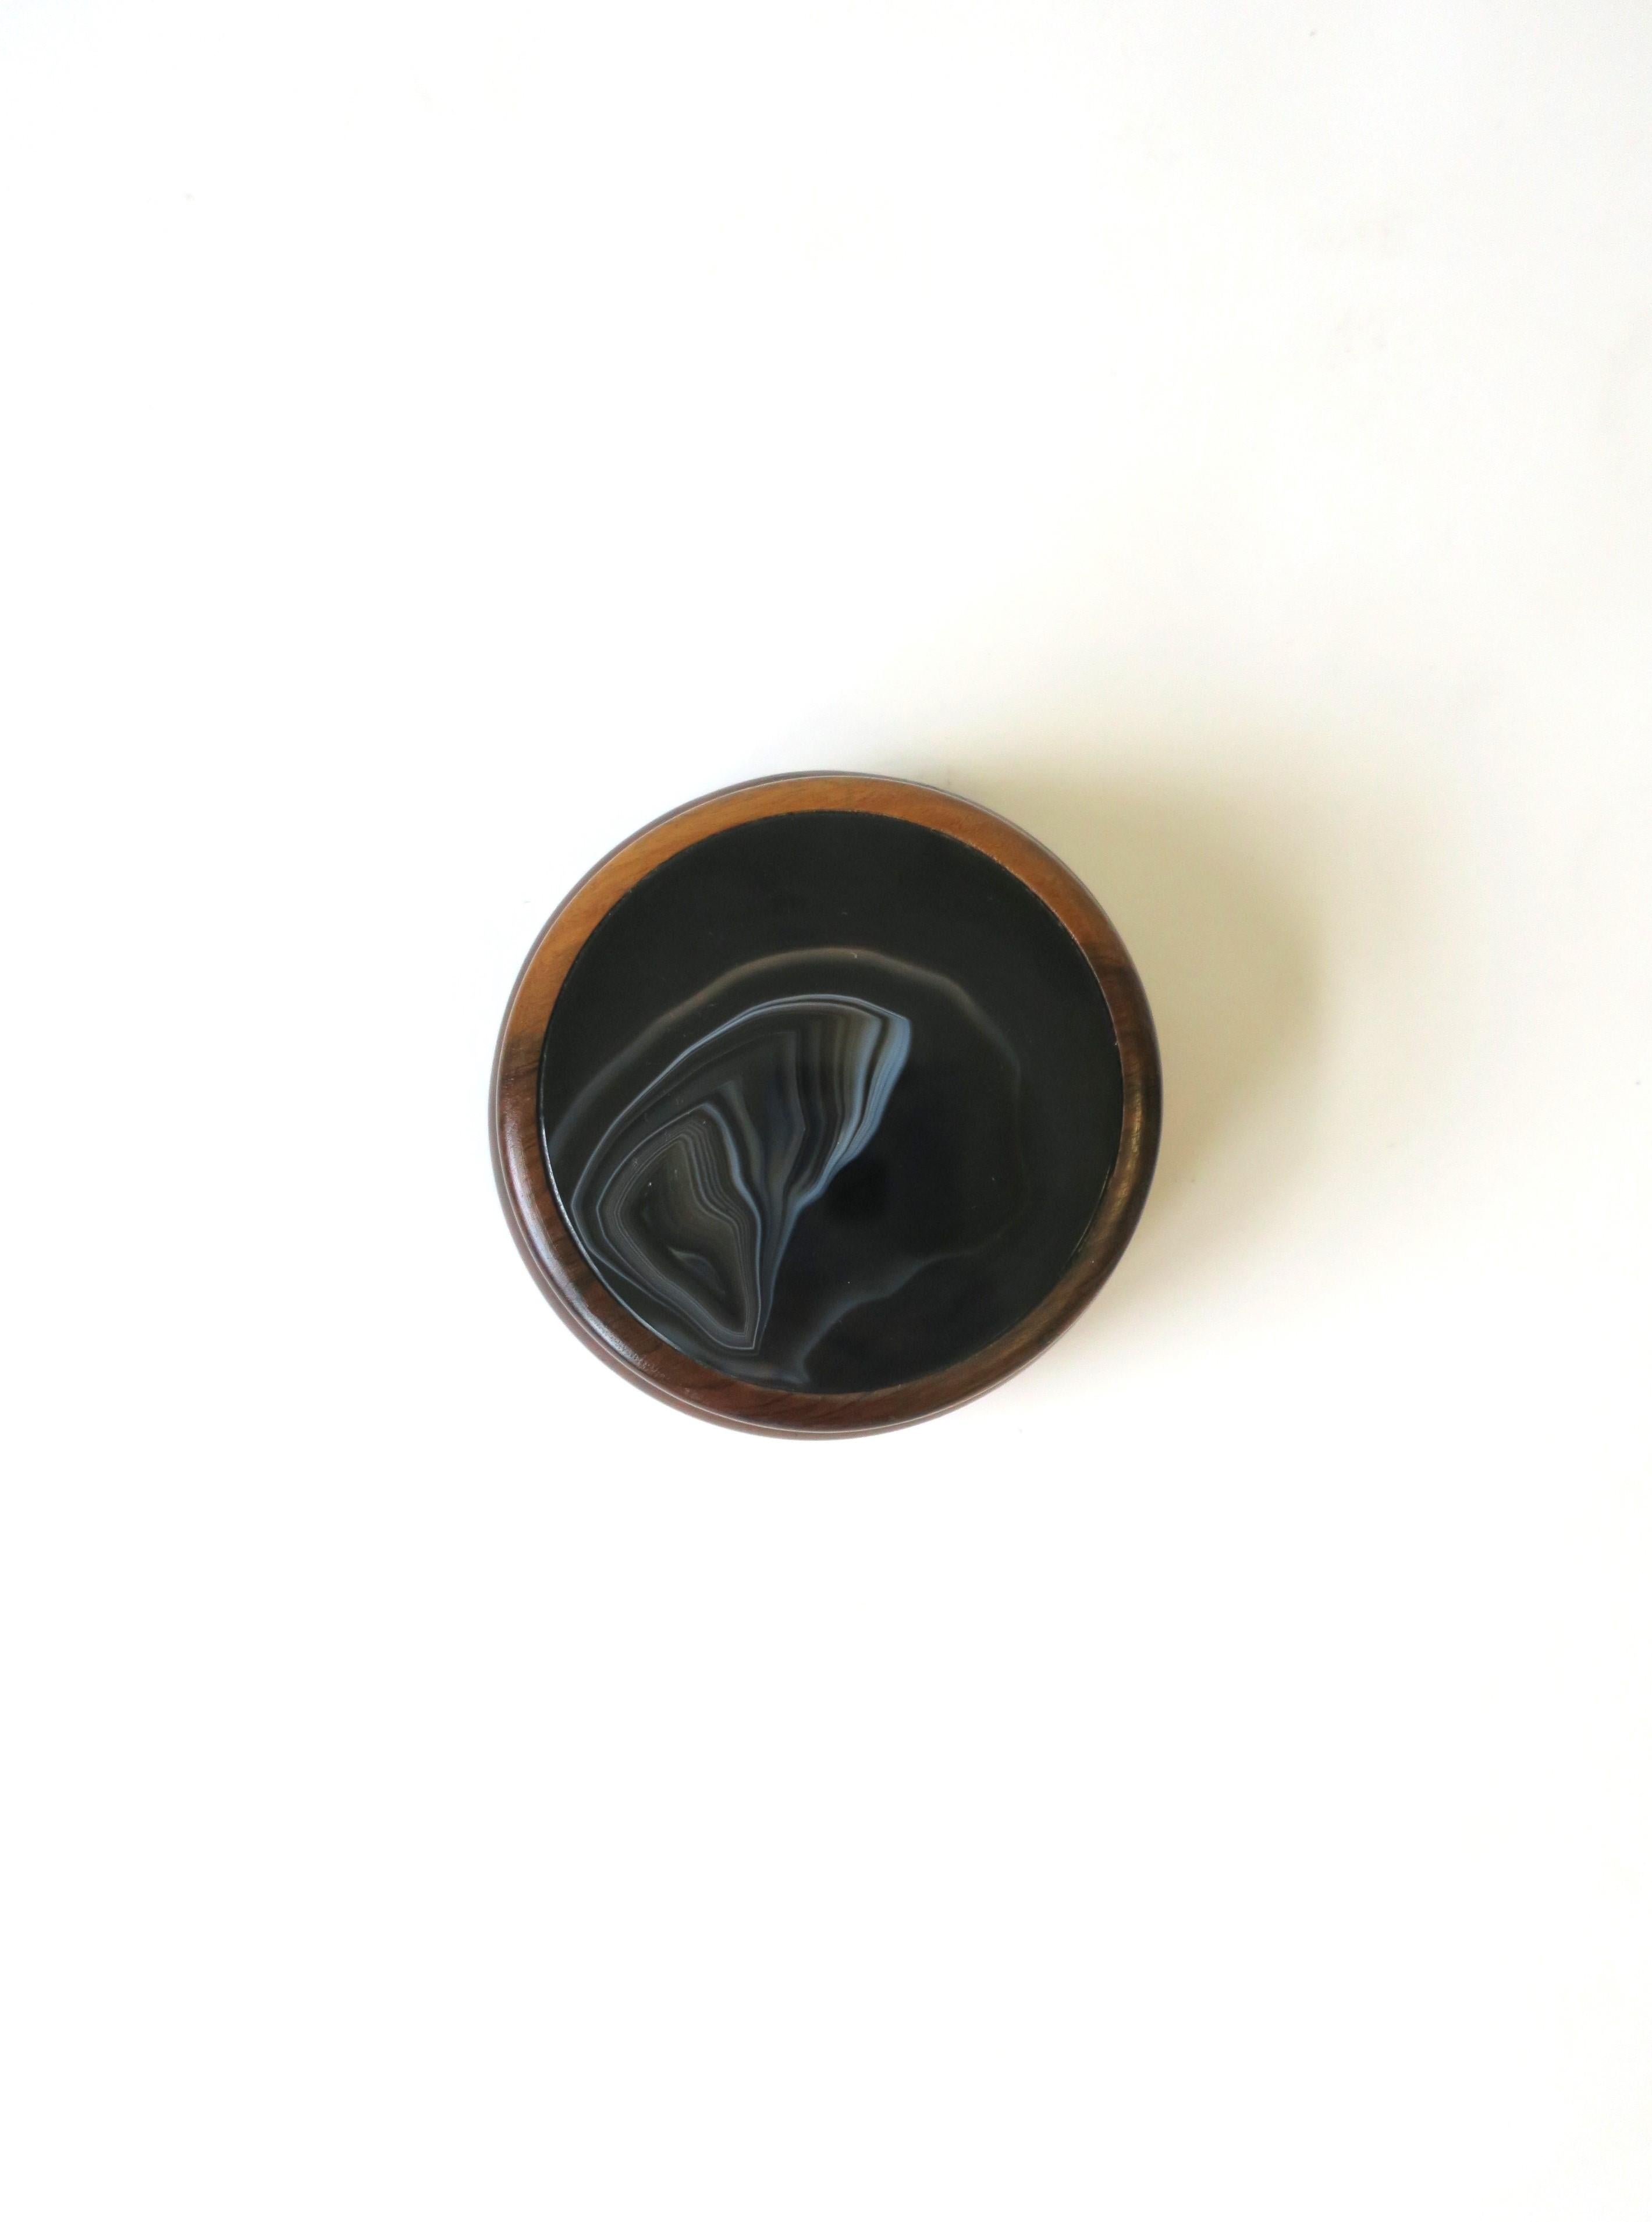 A Brazilian hardwood and black and white agate onyx round jewelry or trinket box, in the Modern style Post-Modern period, circa, late-20th century, Brazil, 1980s, early 1990s. A hardwood round box with a black and white agate onyx lid. A great piece